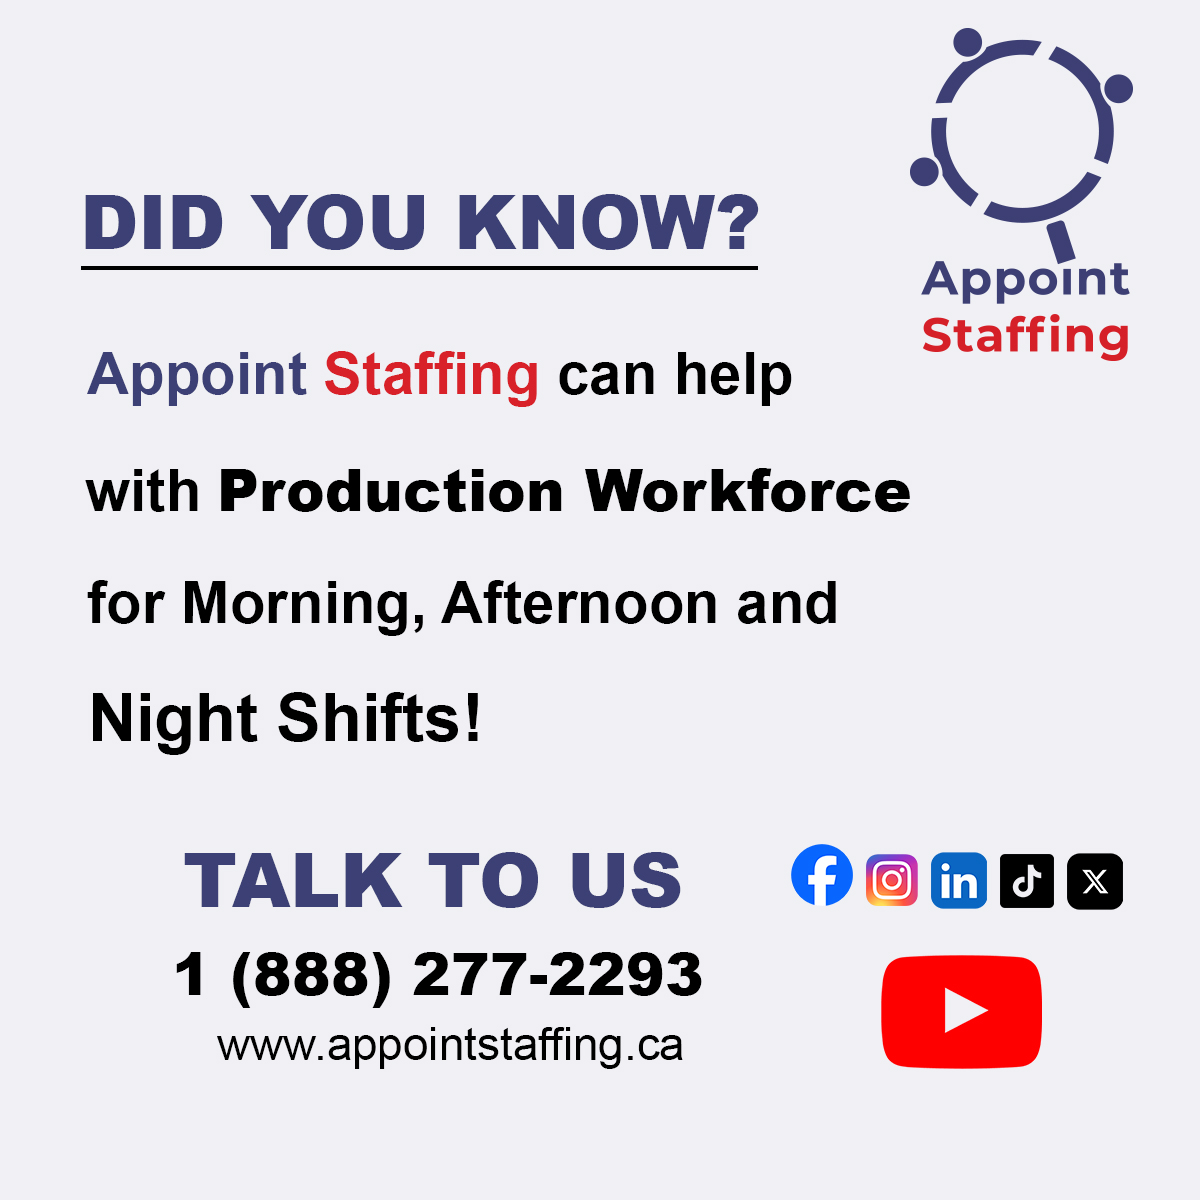 Appoint Staffing can help with Production Workforce for Morning, Afternoon and Evening Shifts.

#temps #production #warehouse #beststaffingagency #staffingsolutions #workforce #HR #AppointStaffing